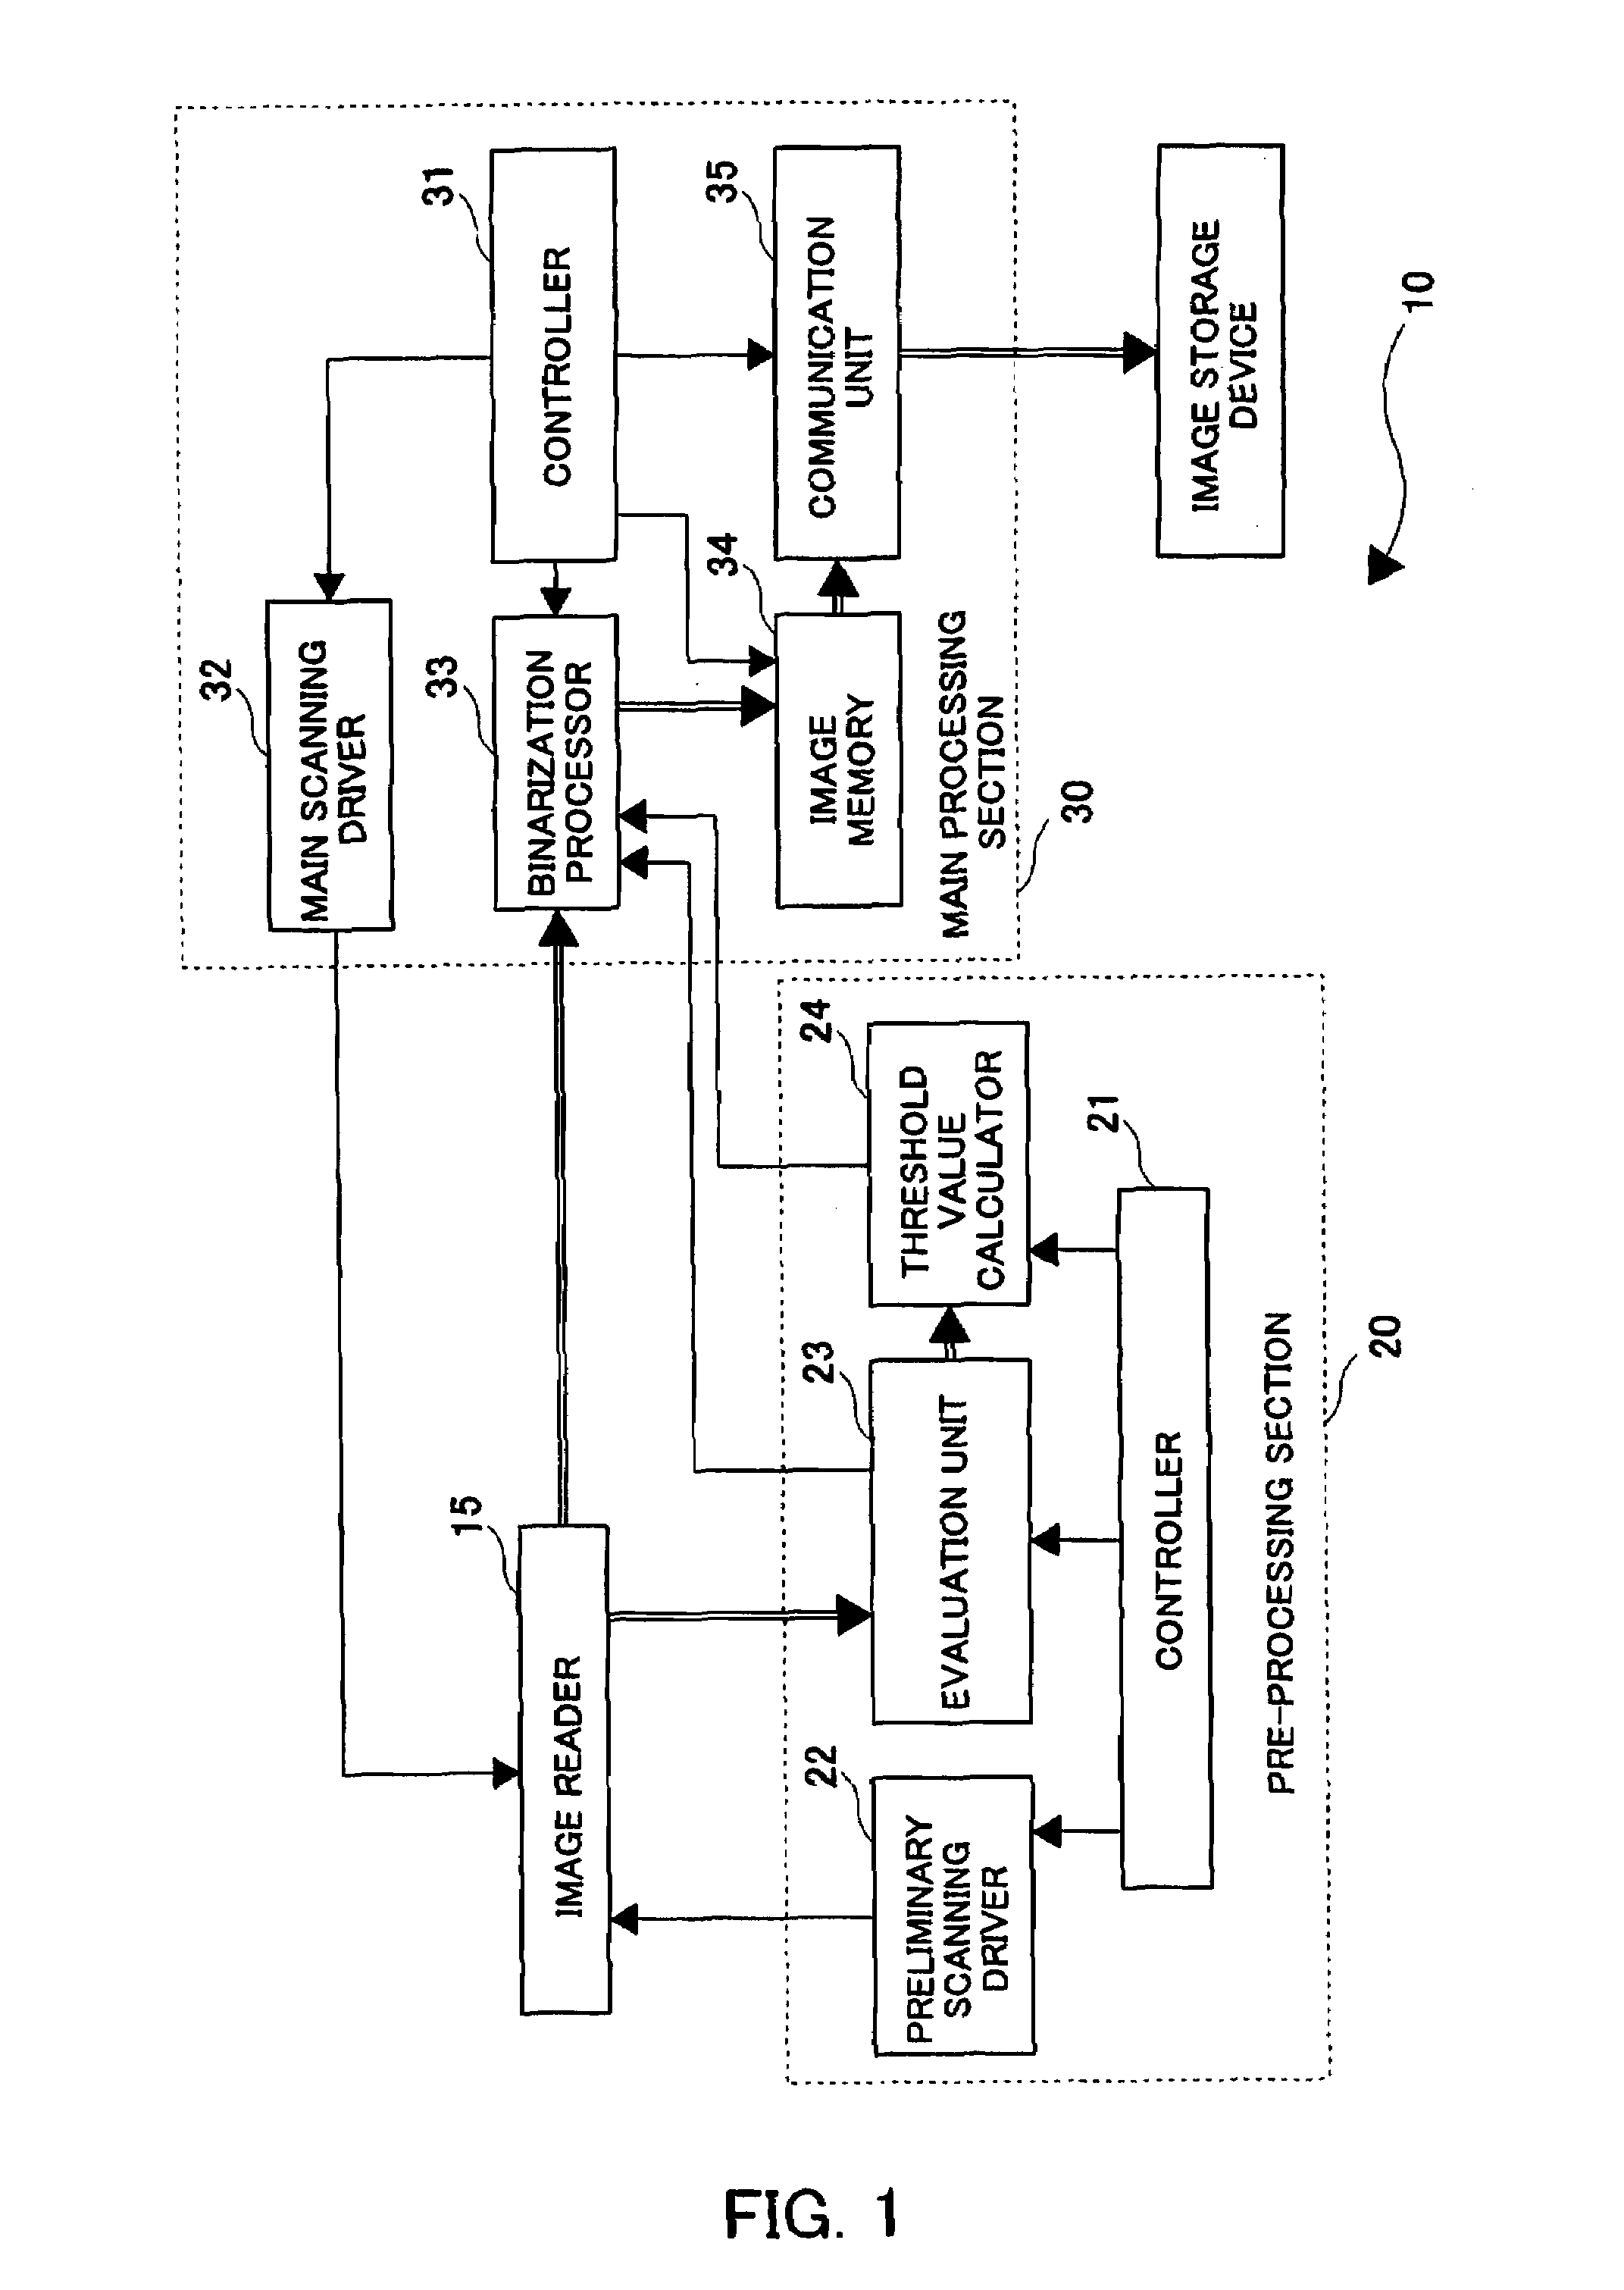 Apparatus and method for binarizing images of negotiable instruments using a binarization method chosen based on an image of a partial area